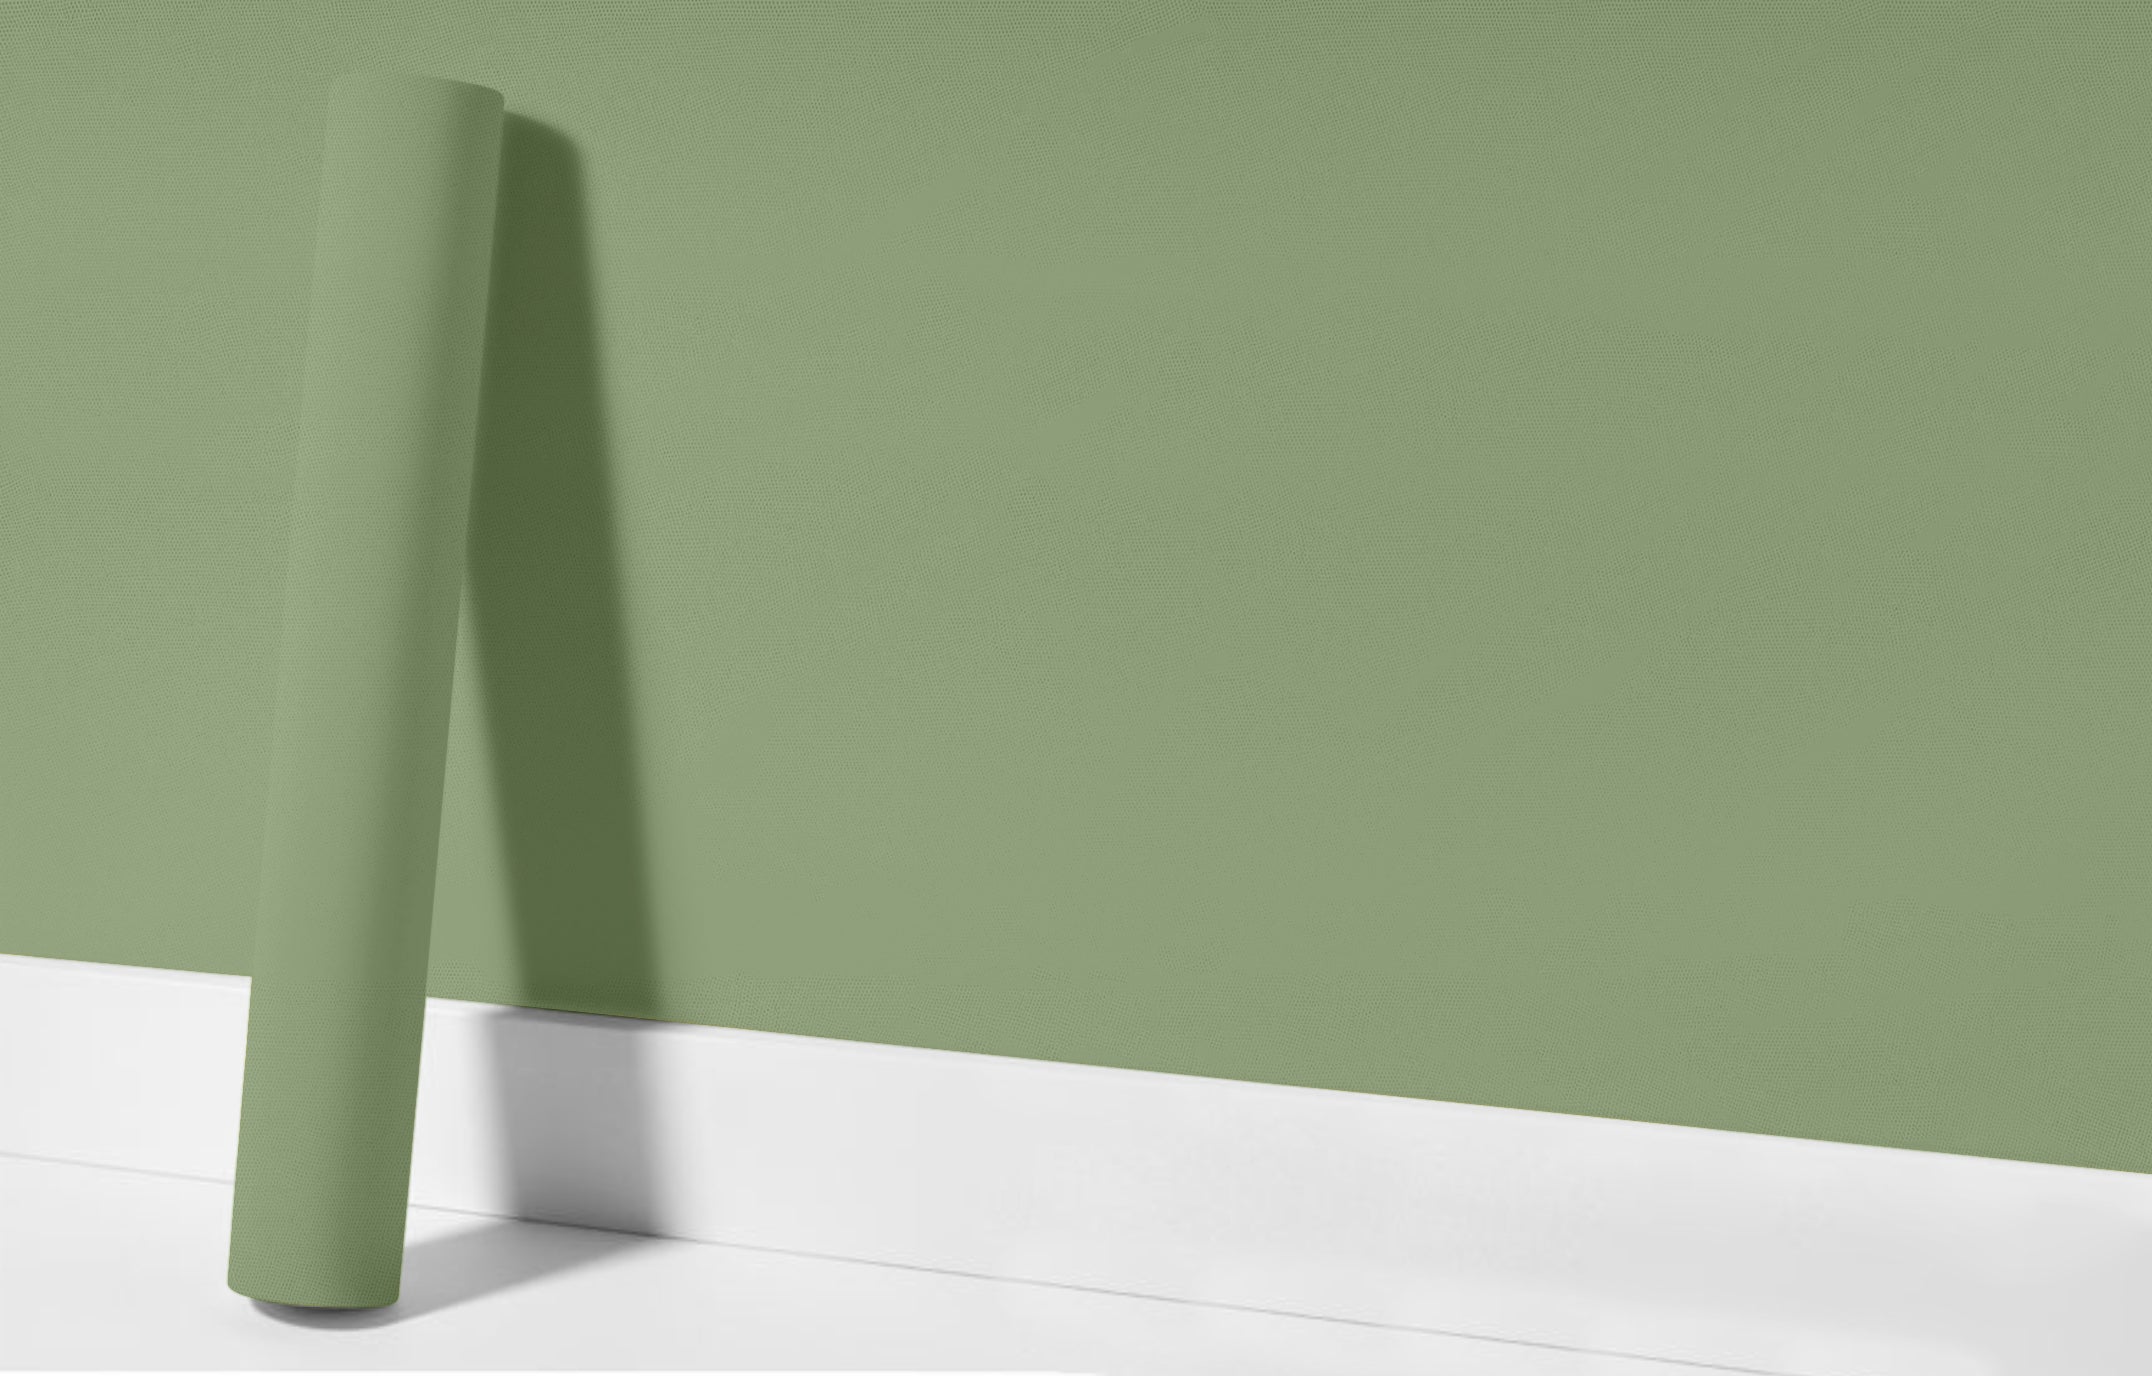 Peel & Stick Removable Re-usable Paint - Color RAL 6021 Pale Green - offRAL™ - RALRAW LLC, USA